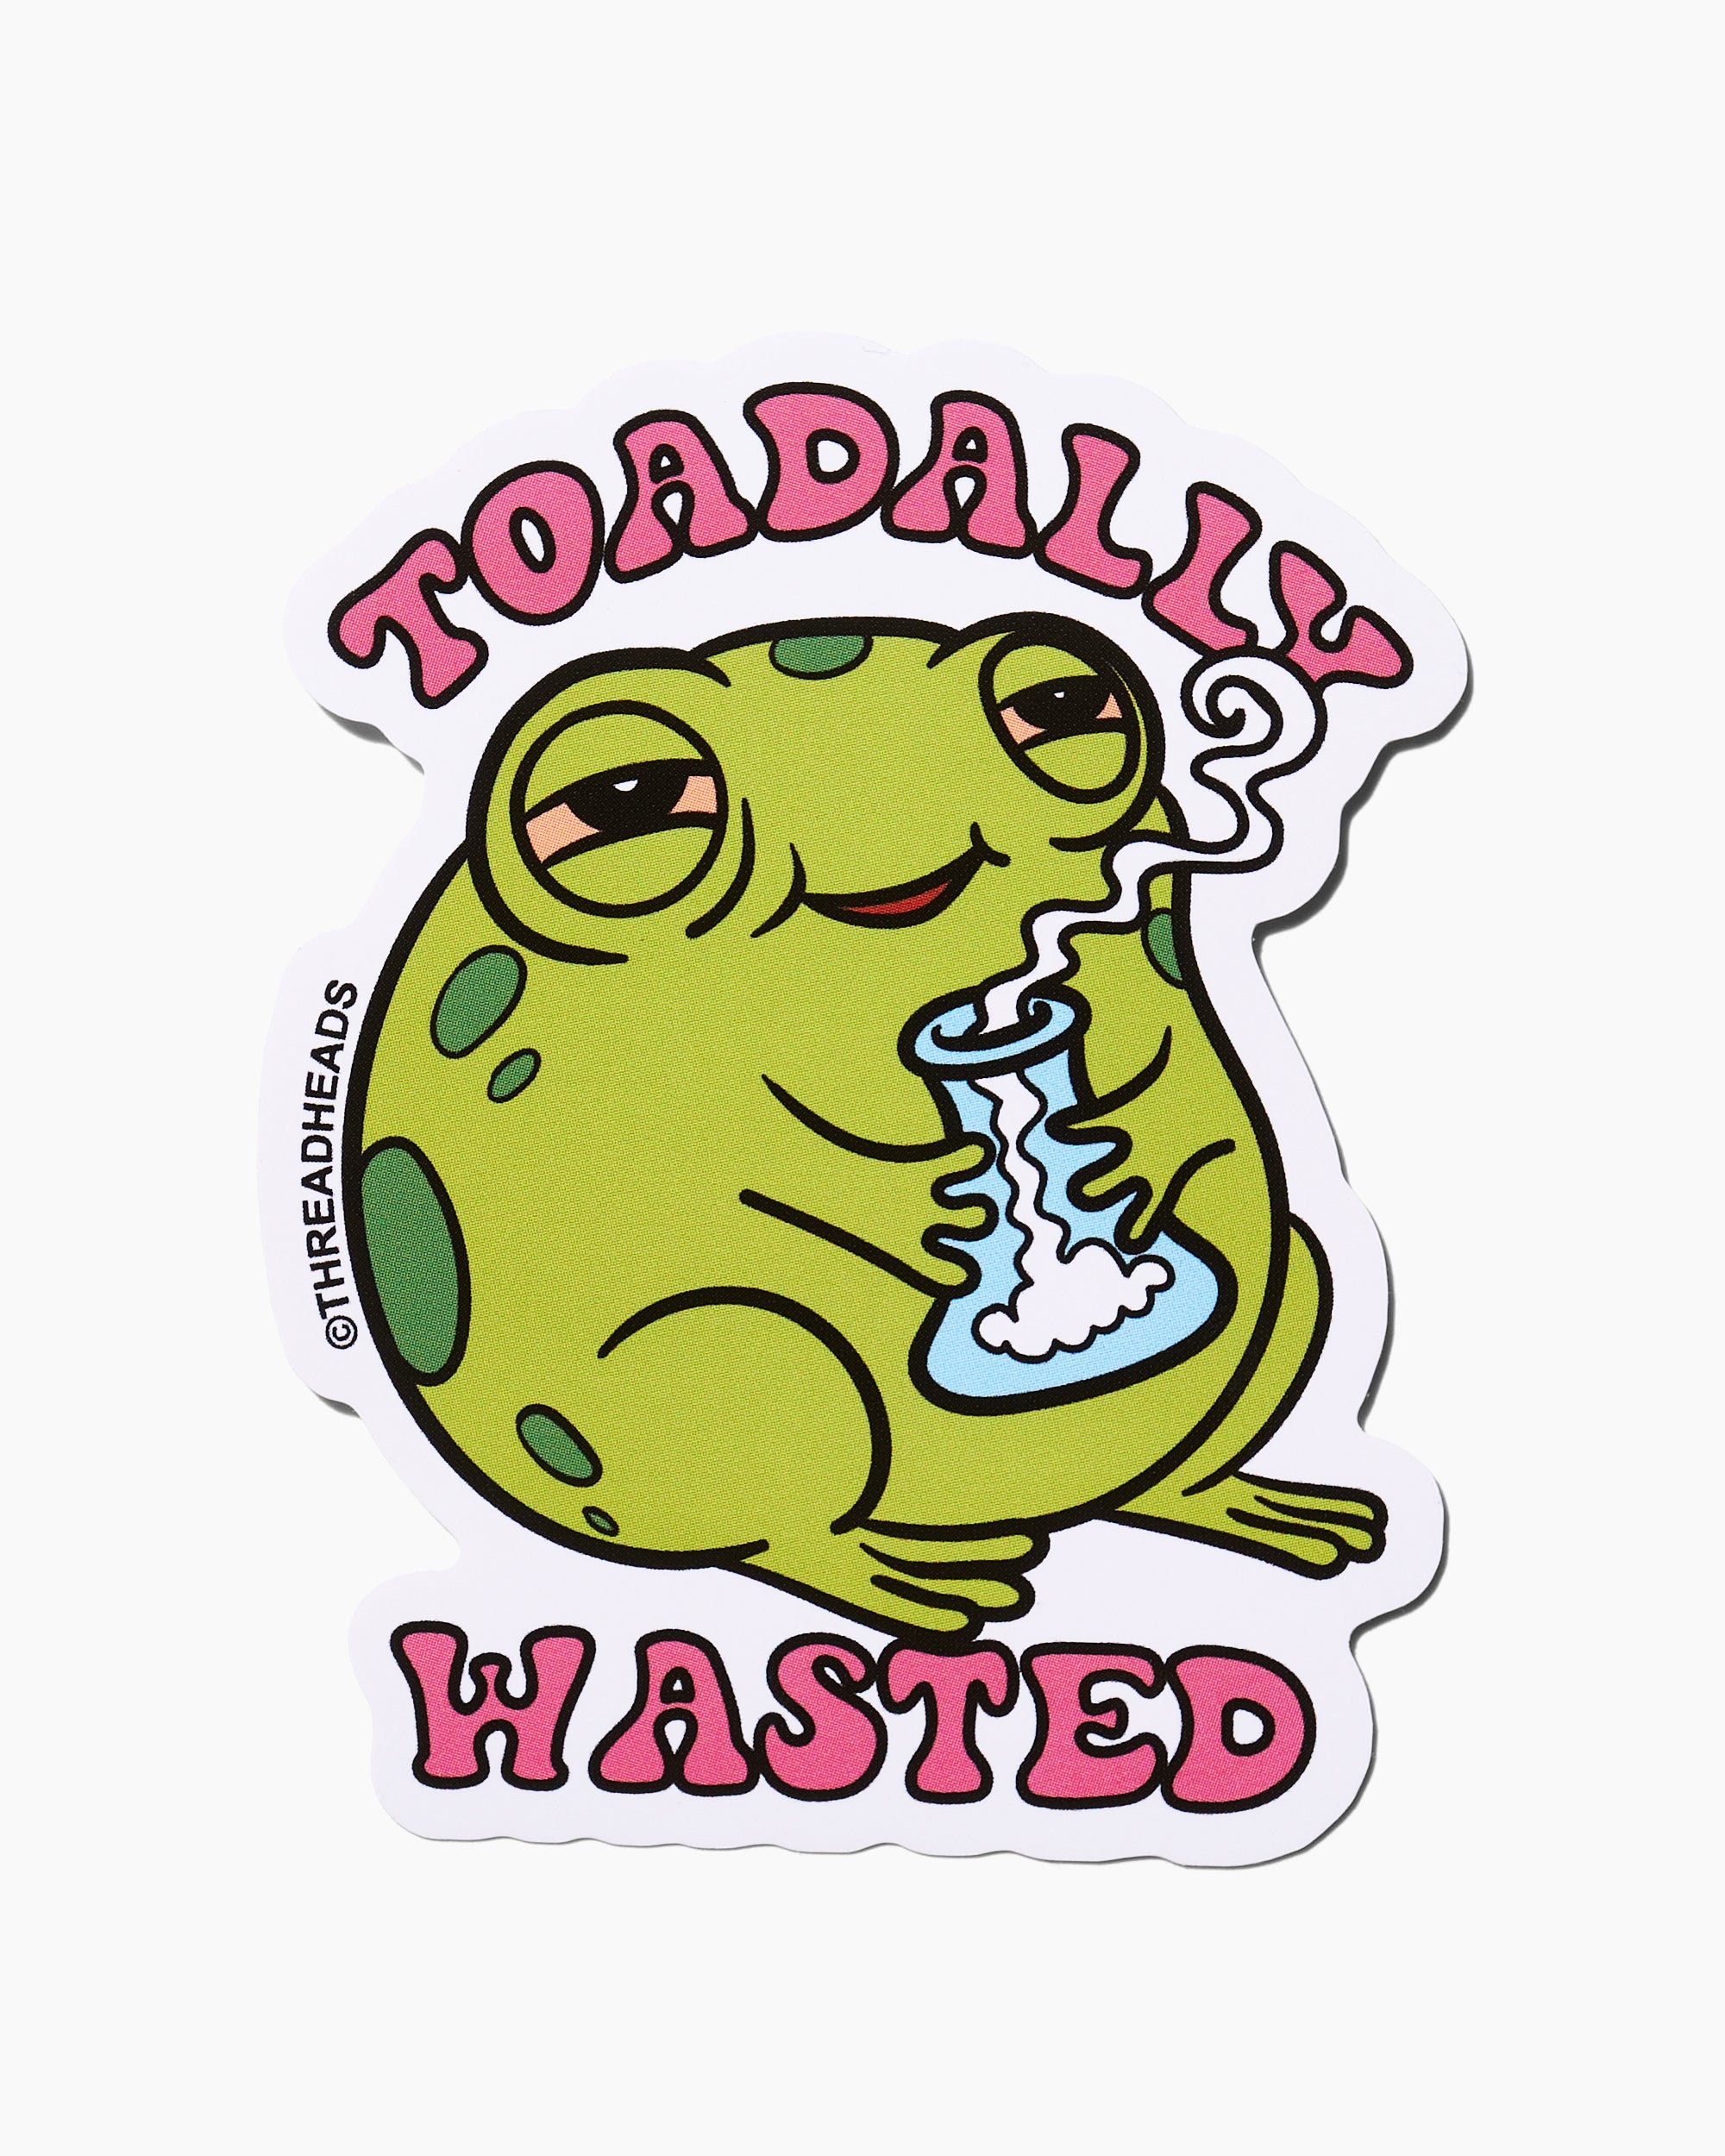 The Wasted Sticker Pack